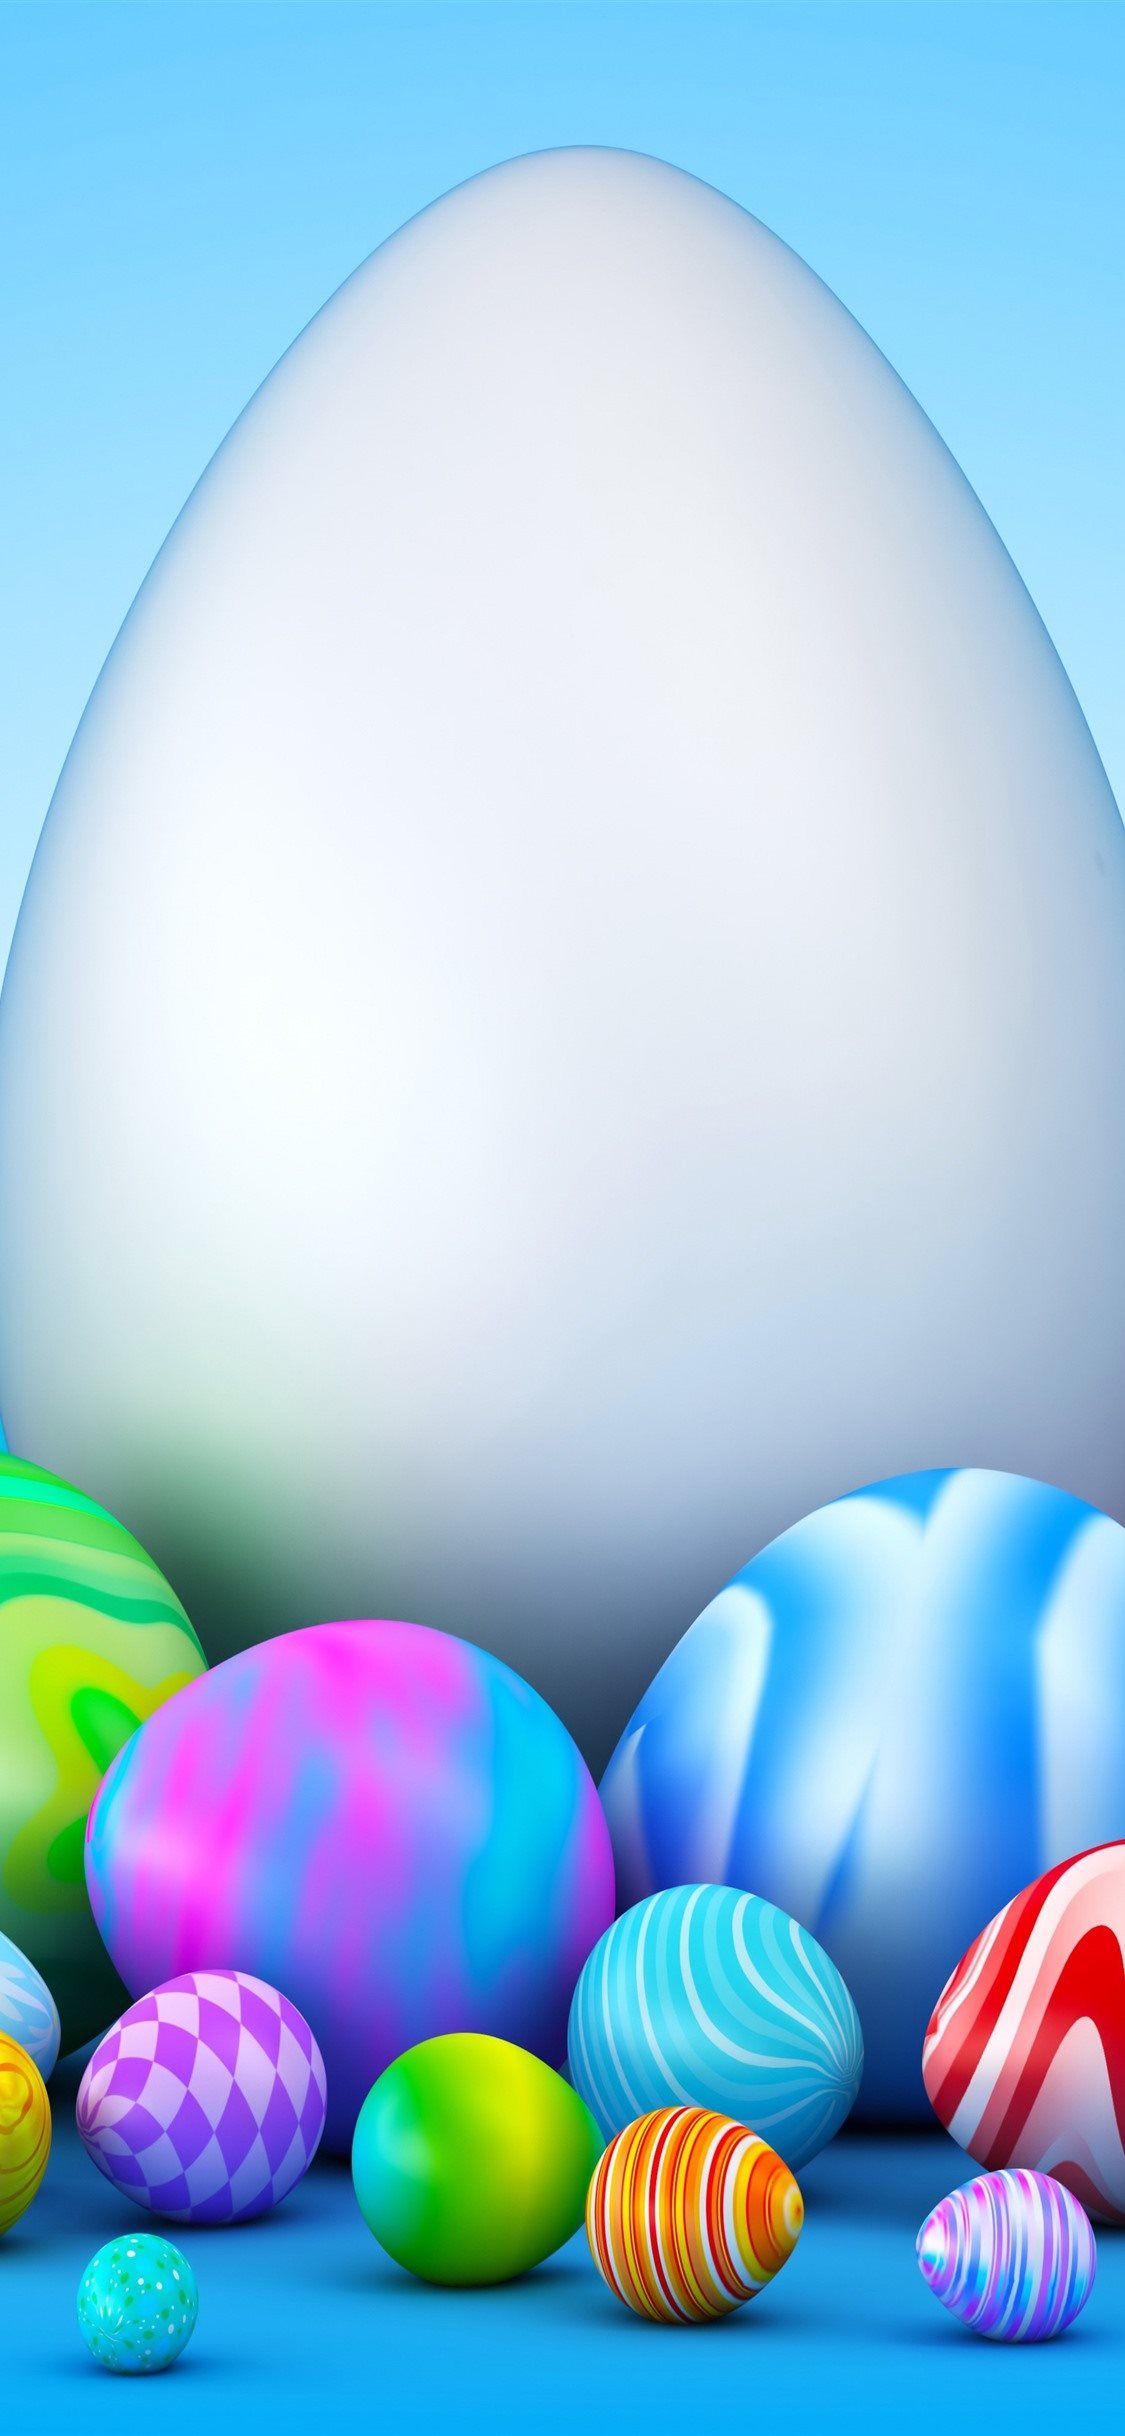 Colorful Easter eggs creative 1125x2436 wallpaper. iPhone X